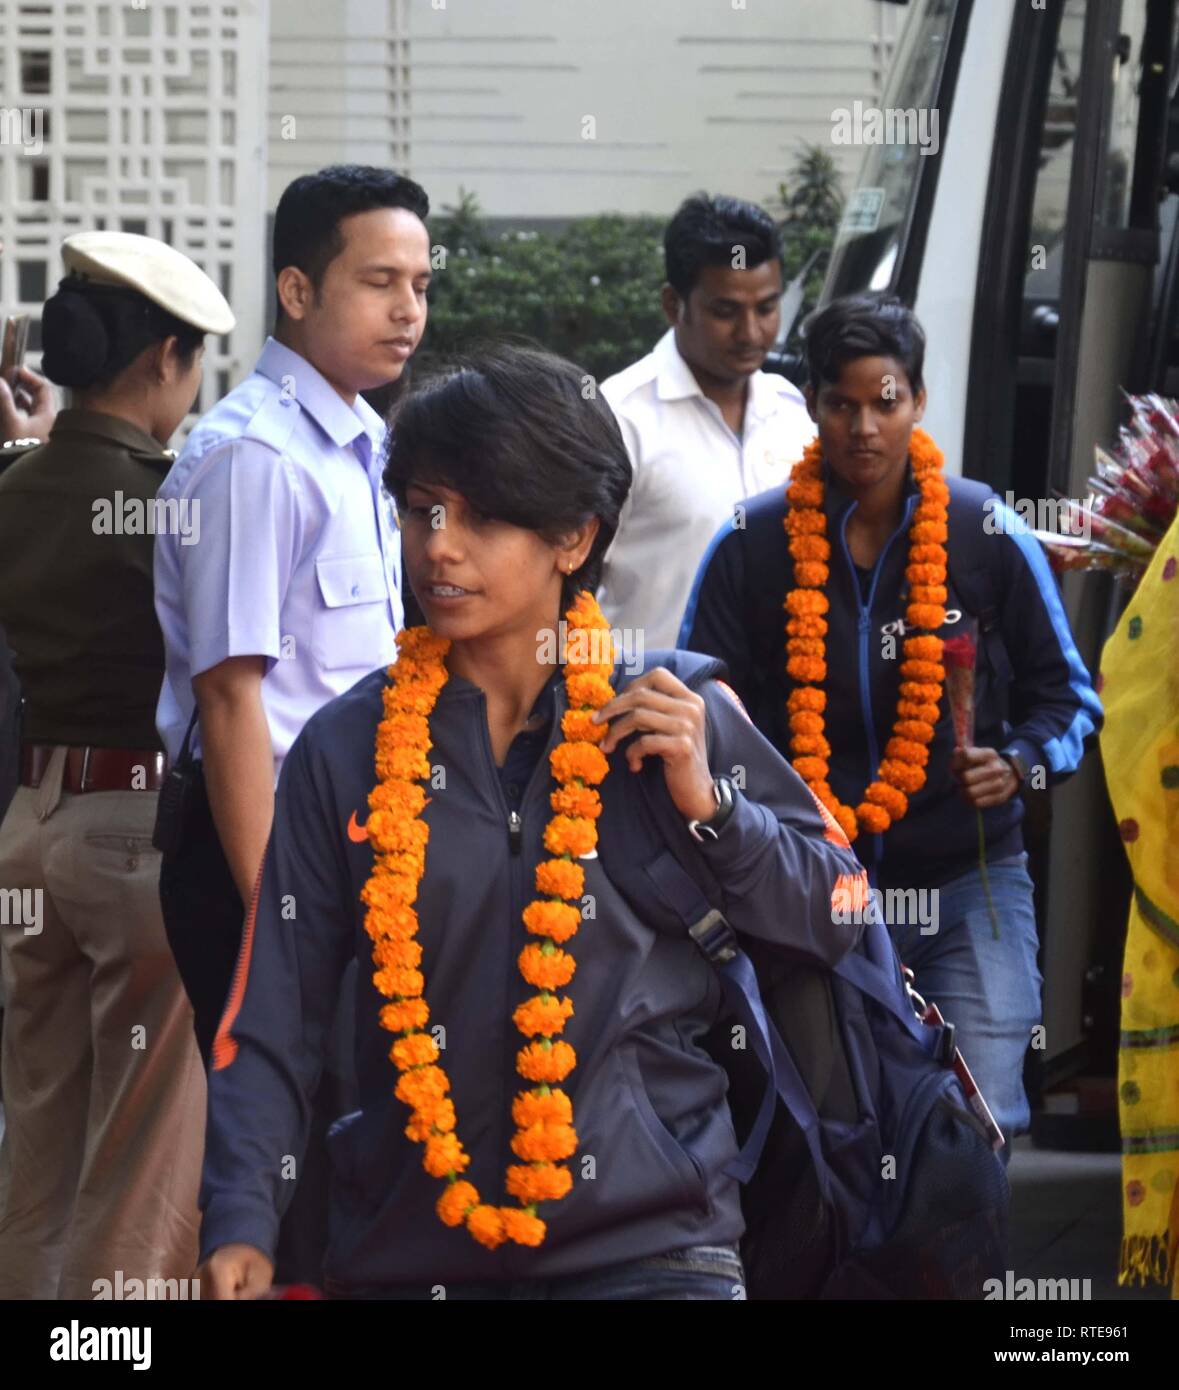 Guwahati, Assam, India. 01st Mar, 2019. Indian Women's Cricket team arrives in Guwahati on Mar 01, 2019. A women's cricket series between India and England. The Indian women's T20 cricket match against England will be held from March 4 to March 10, 2019, at Barsapara stadium in Guwahati. Credit: Hafiz Ahmed/Alamy Live News Stock Photo